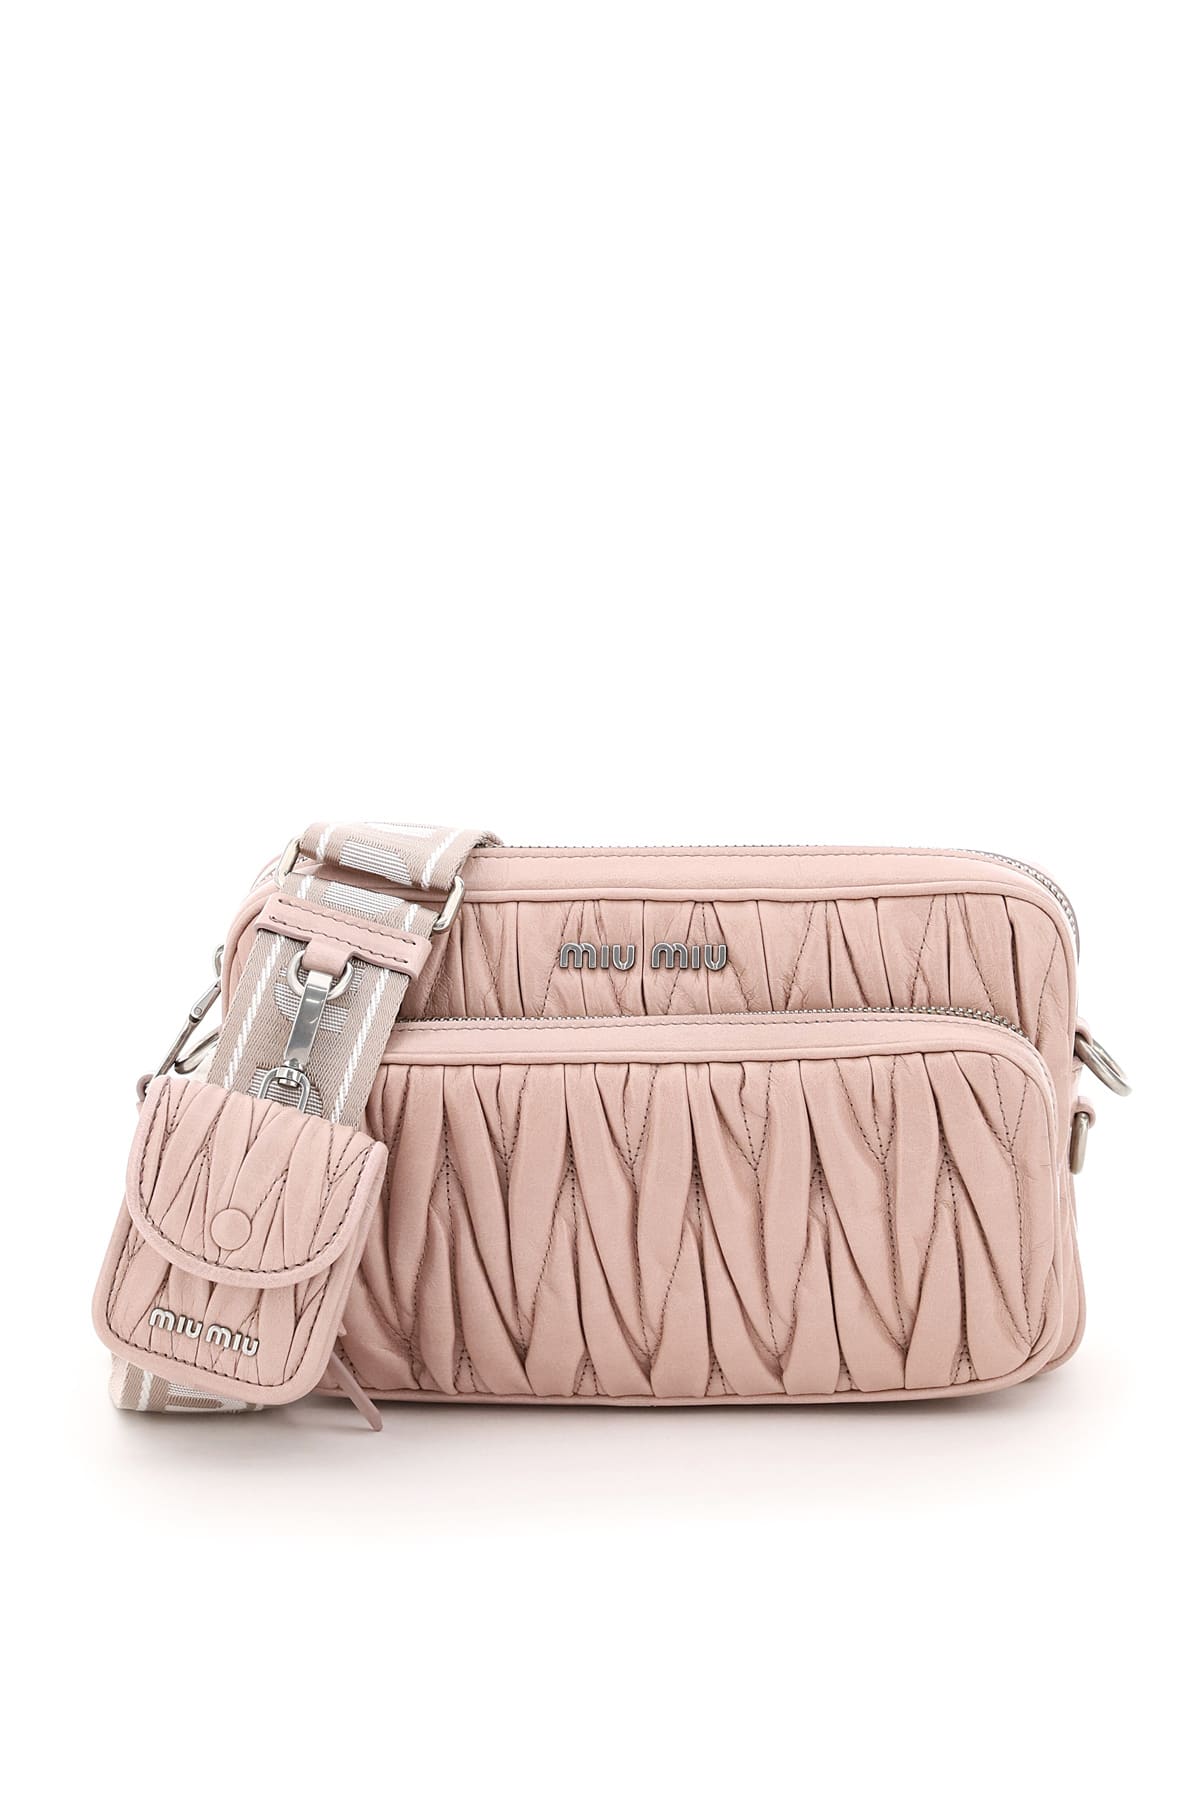 MIU MIU QUILTED CAMERA BAG WITH POUCH,11902524